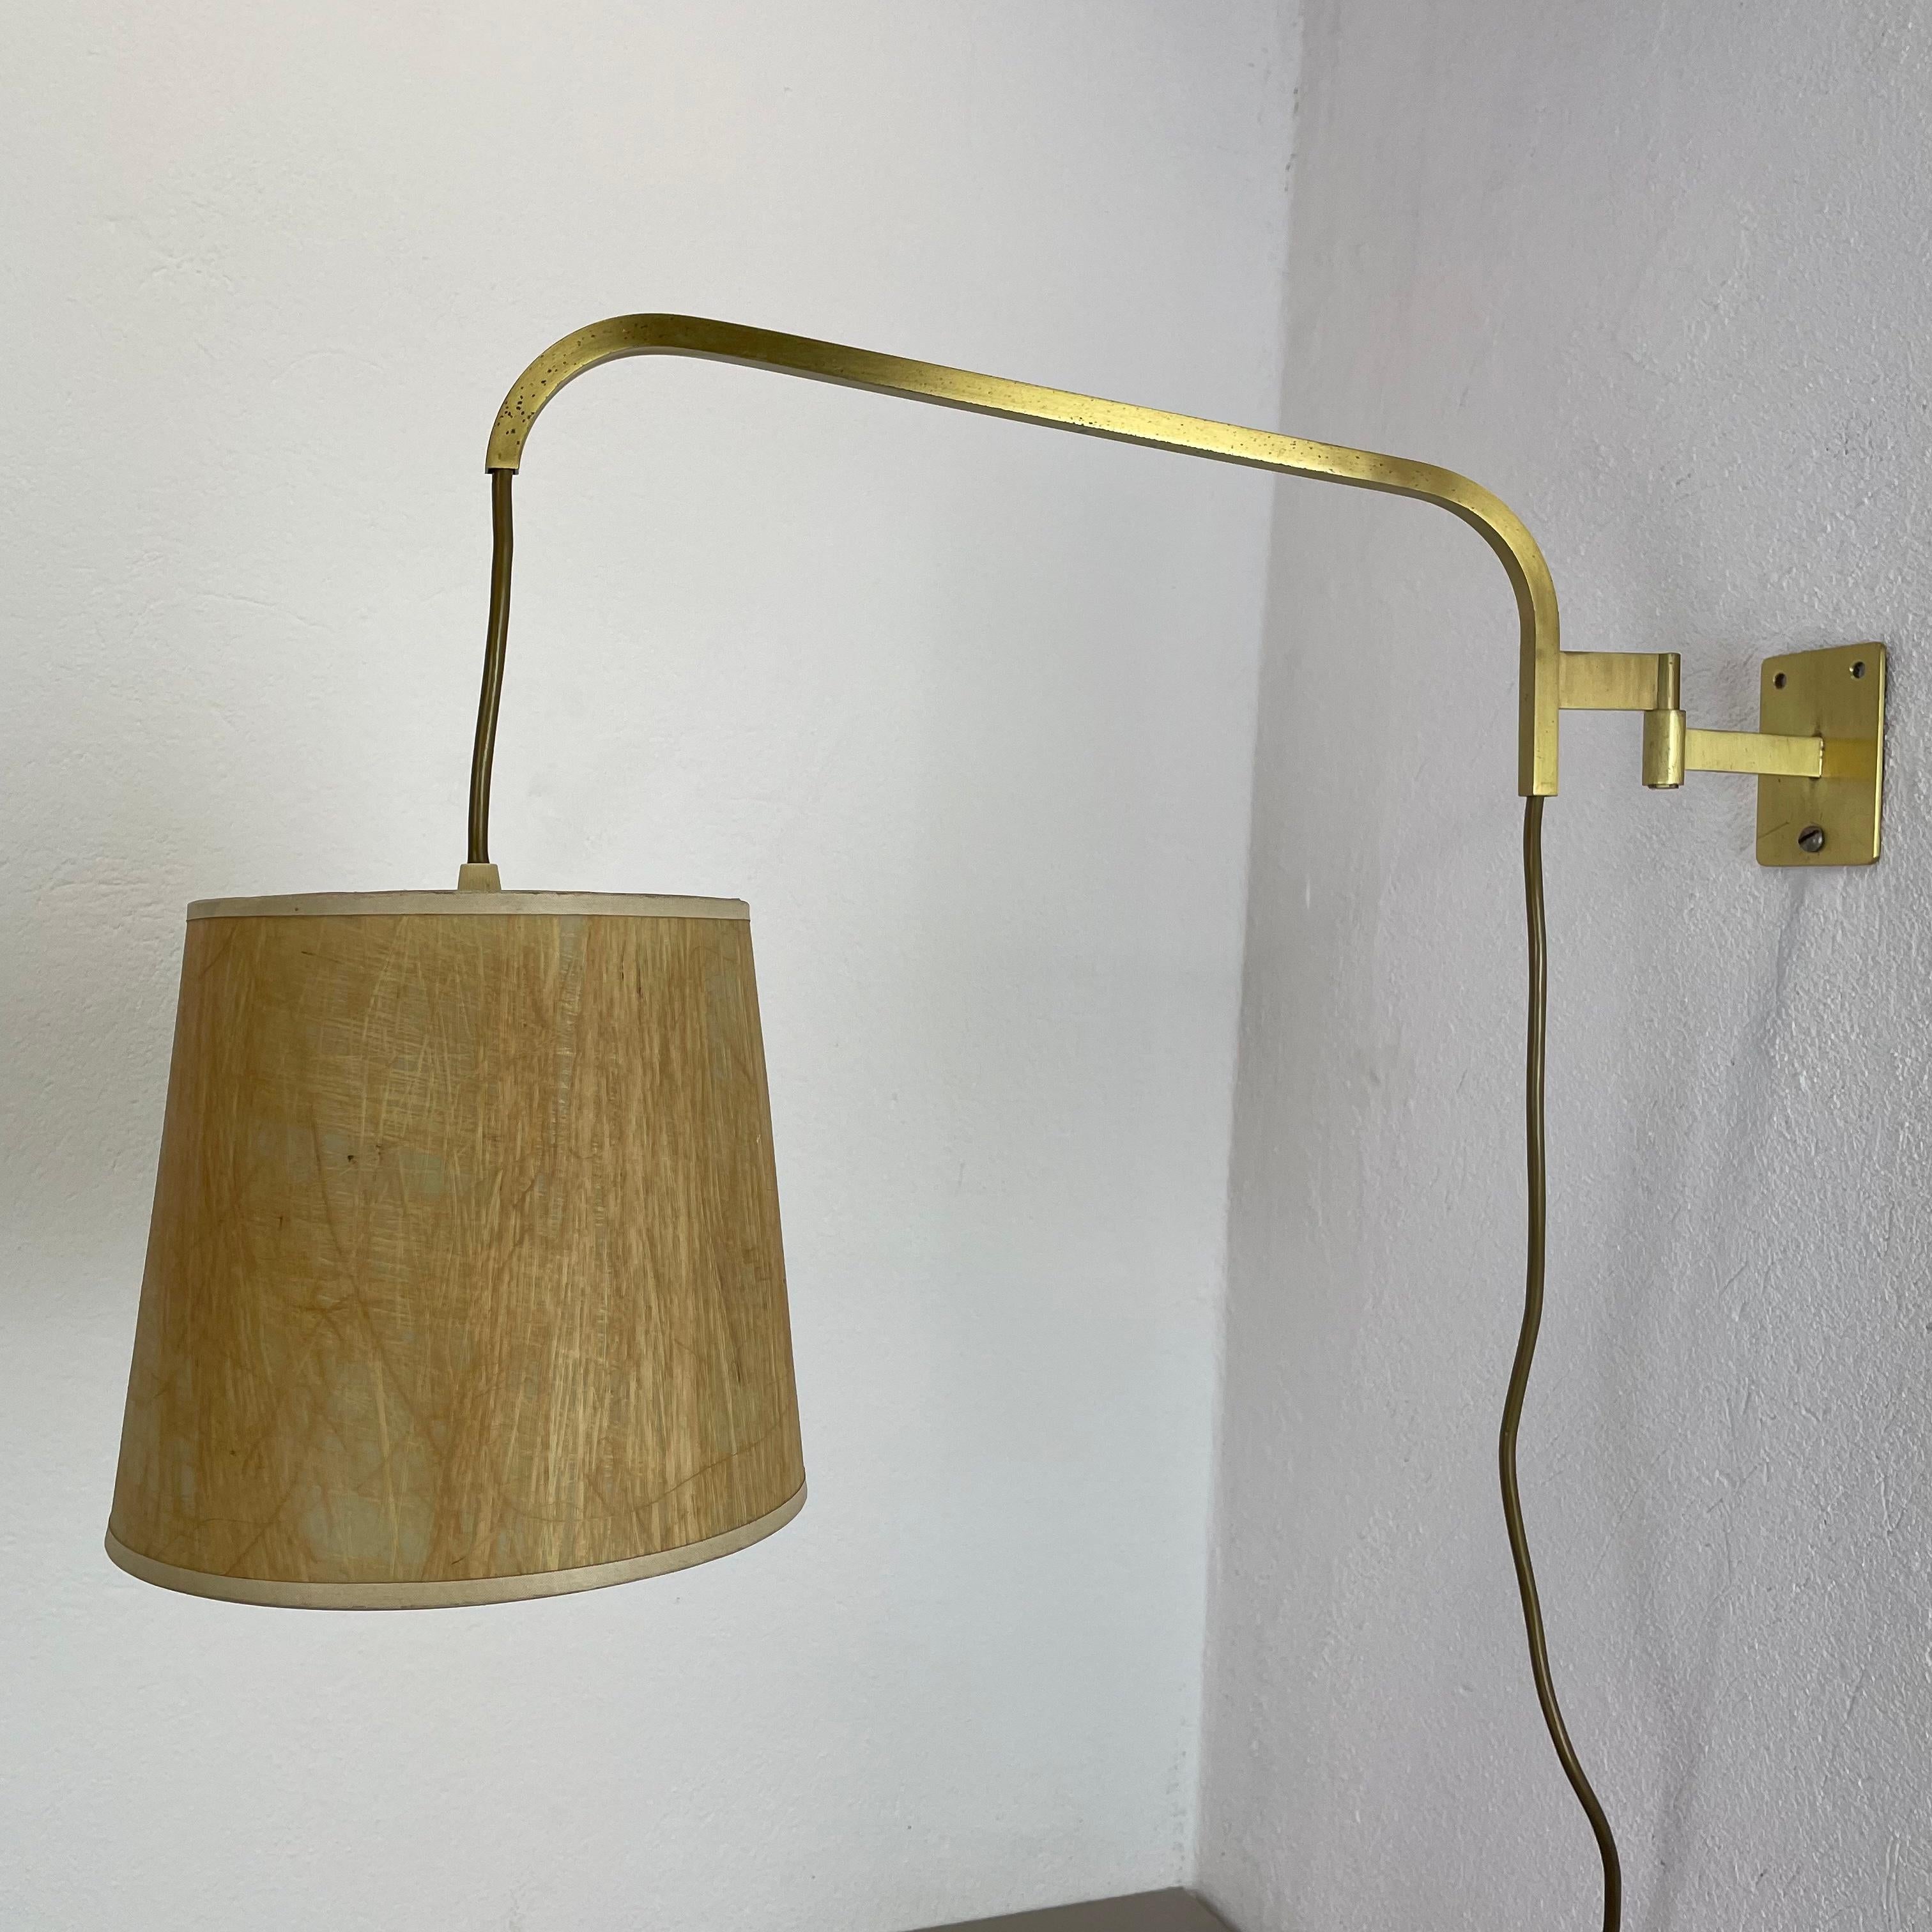 Minimalist Stilnovo Style Adjustable Counter Weight Brass Wall Light Italy 1960s For Sale 2